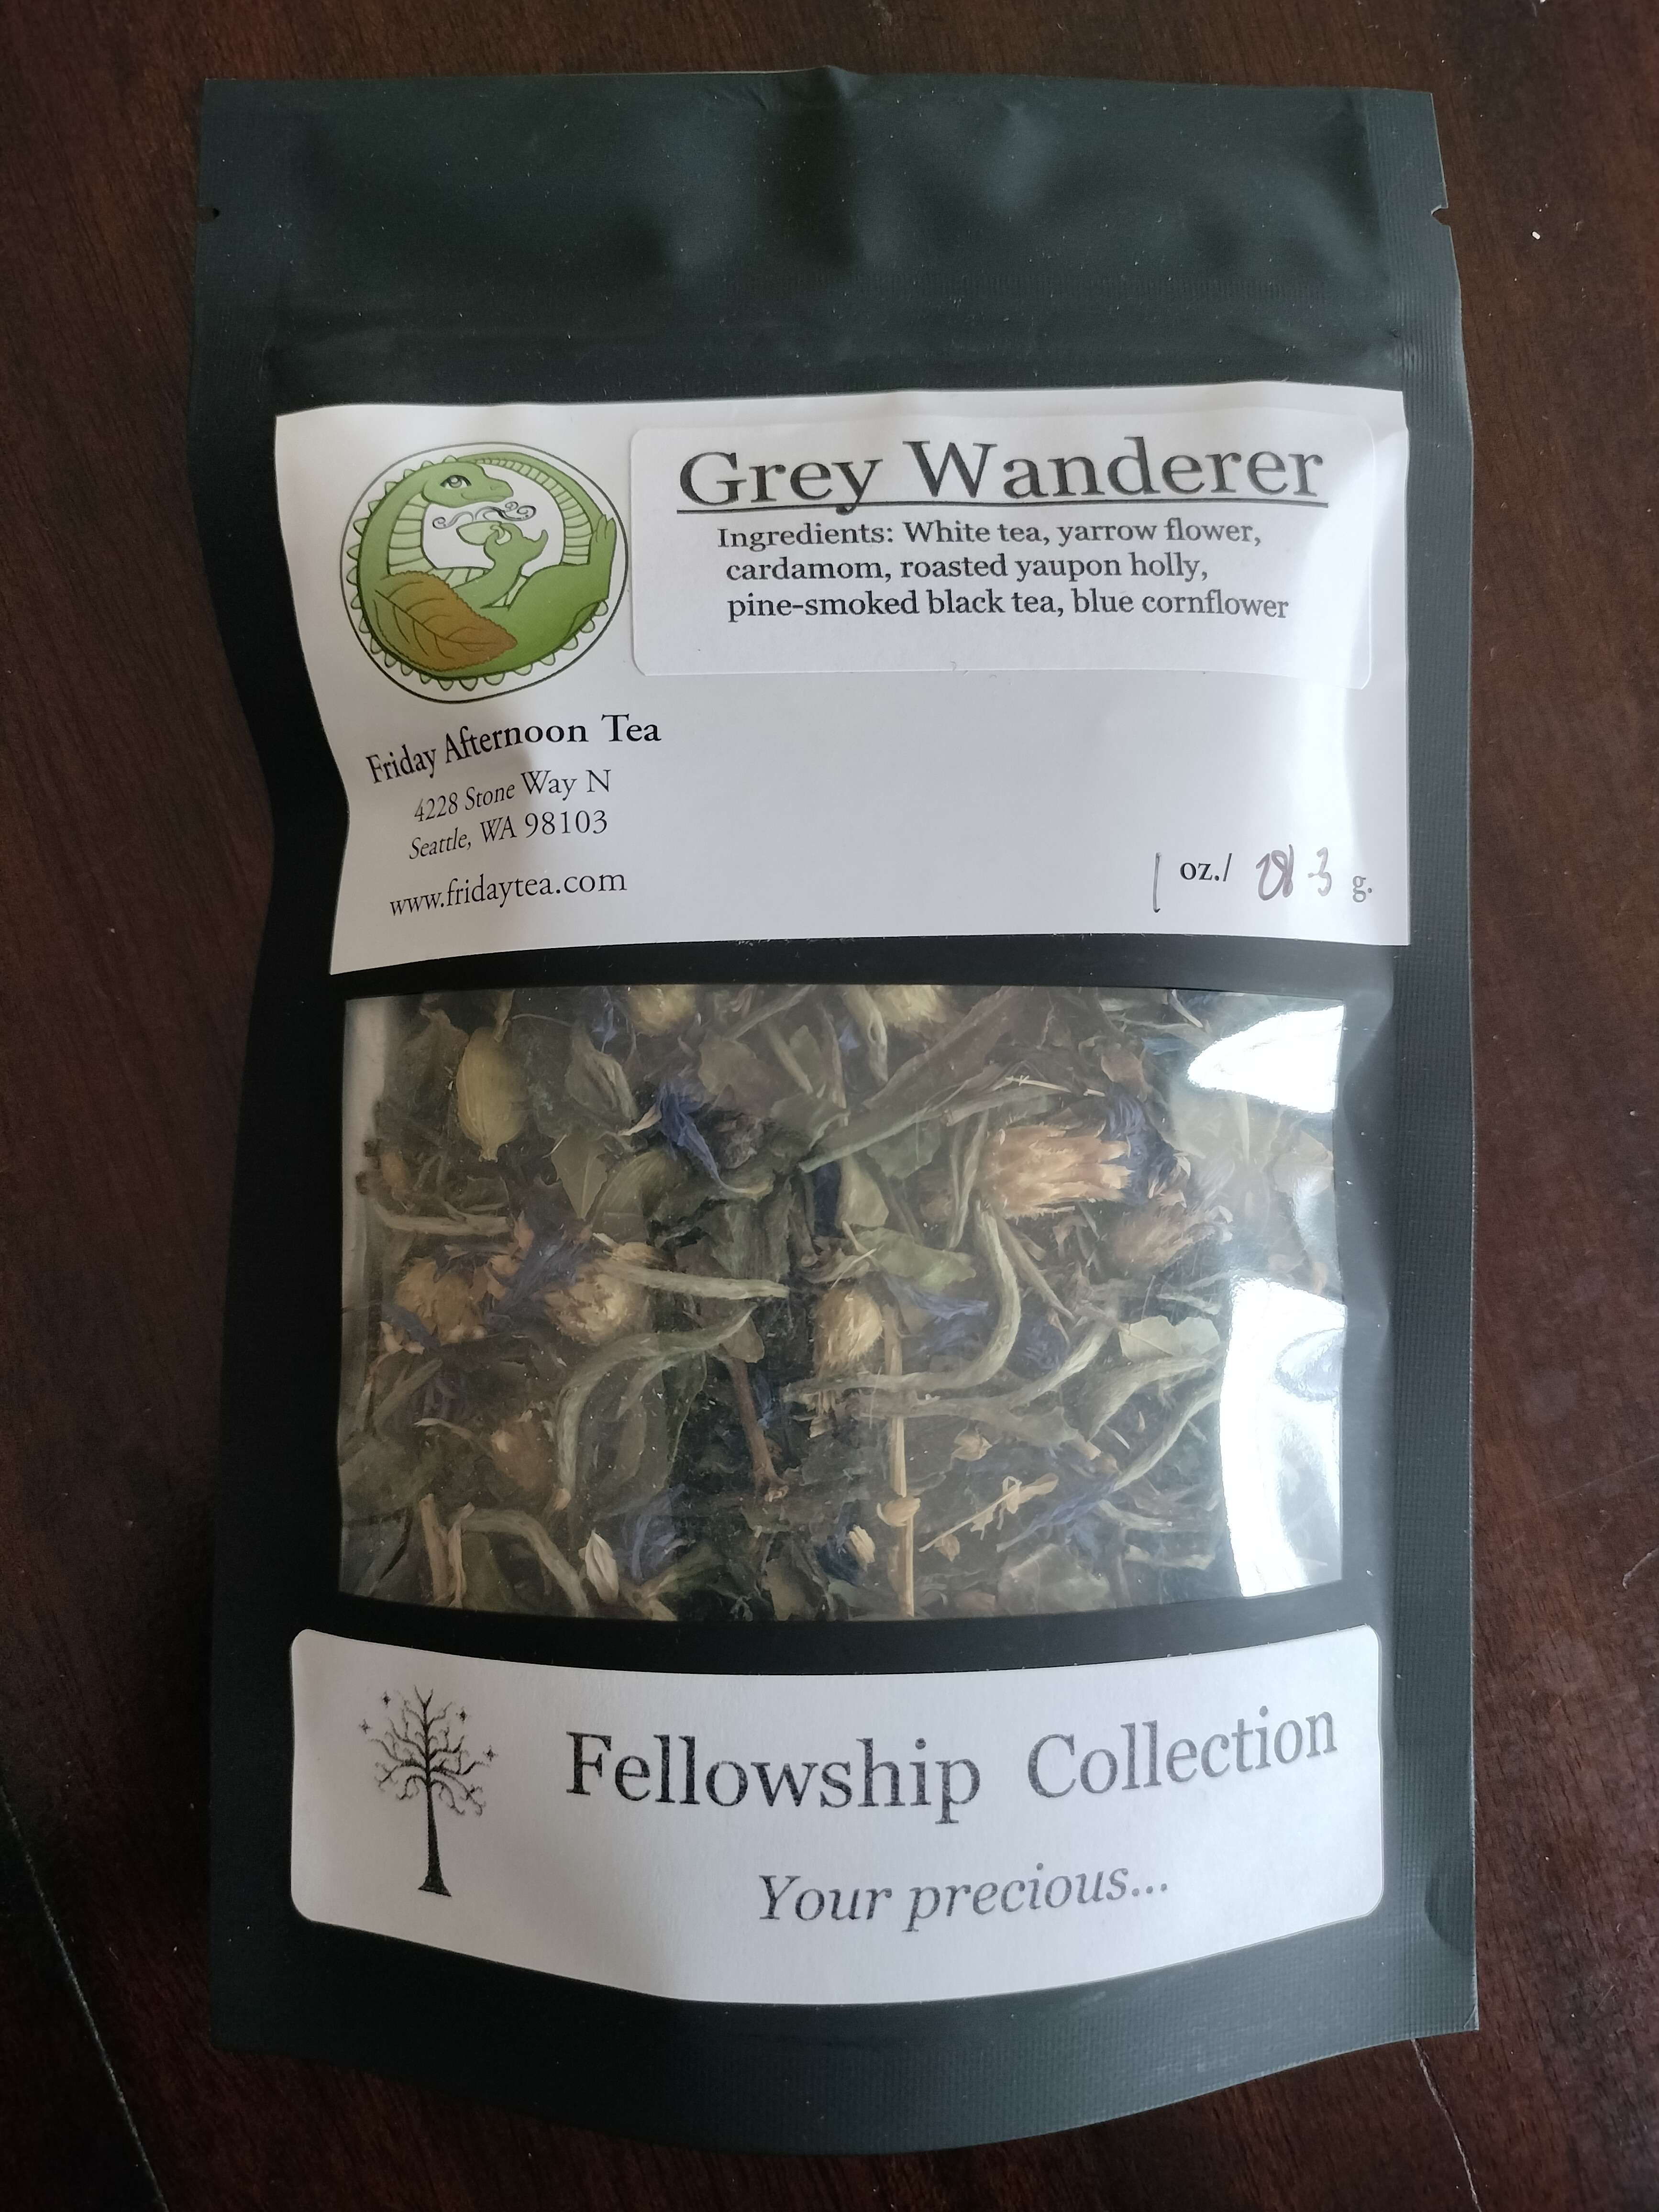 The tea blend Grey Wanderer from Friday Afternoon Tea. Ingredients are White tea, yarrow flower, cardamom, roasted yaupon holly, pine-smoked black tea, and blue cornflower.